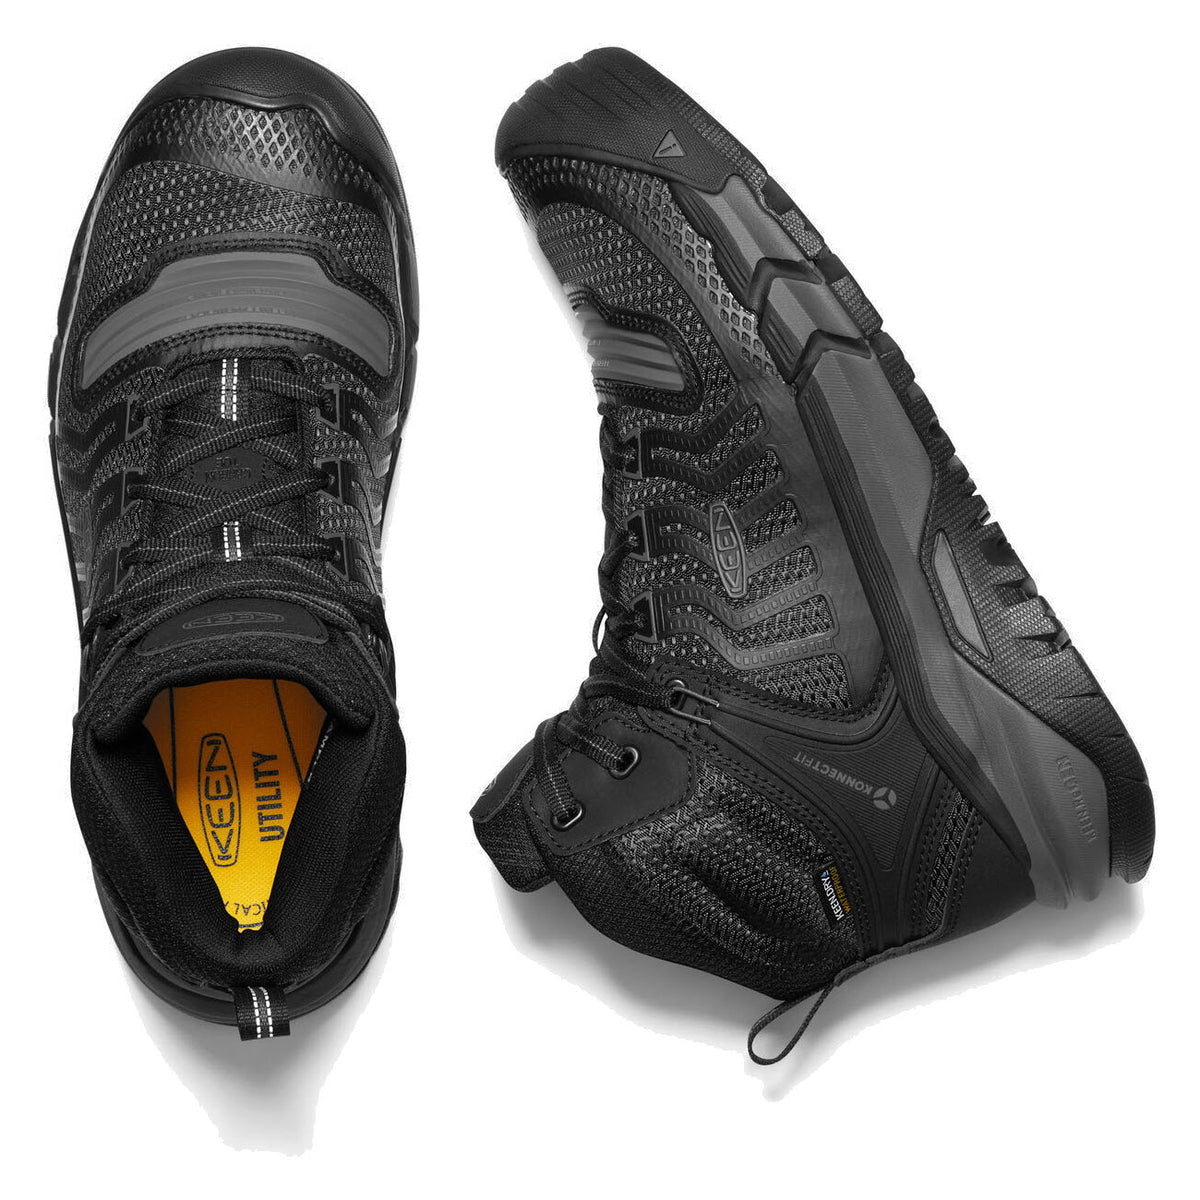 A pair of black sneakers featuring the KEEN.DRY technology label, with the brand &quot;Keen&quot; visible on the insole.